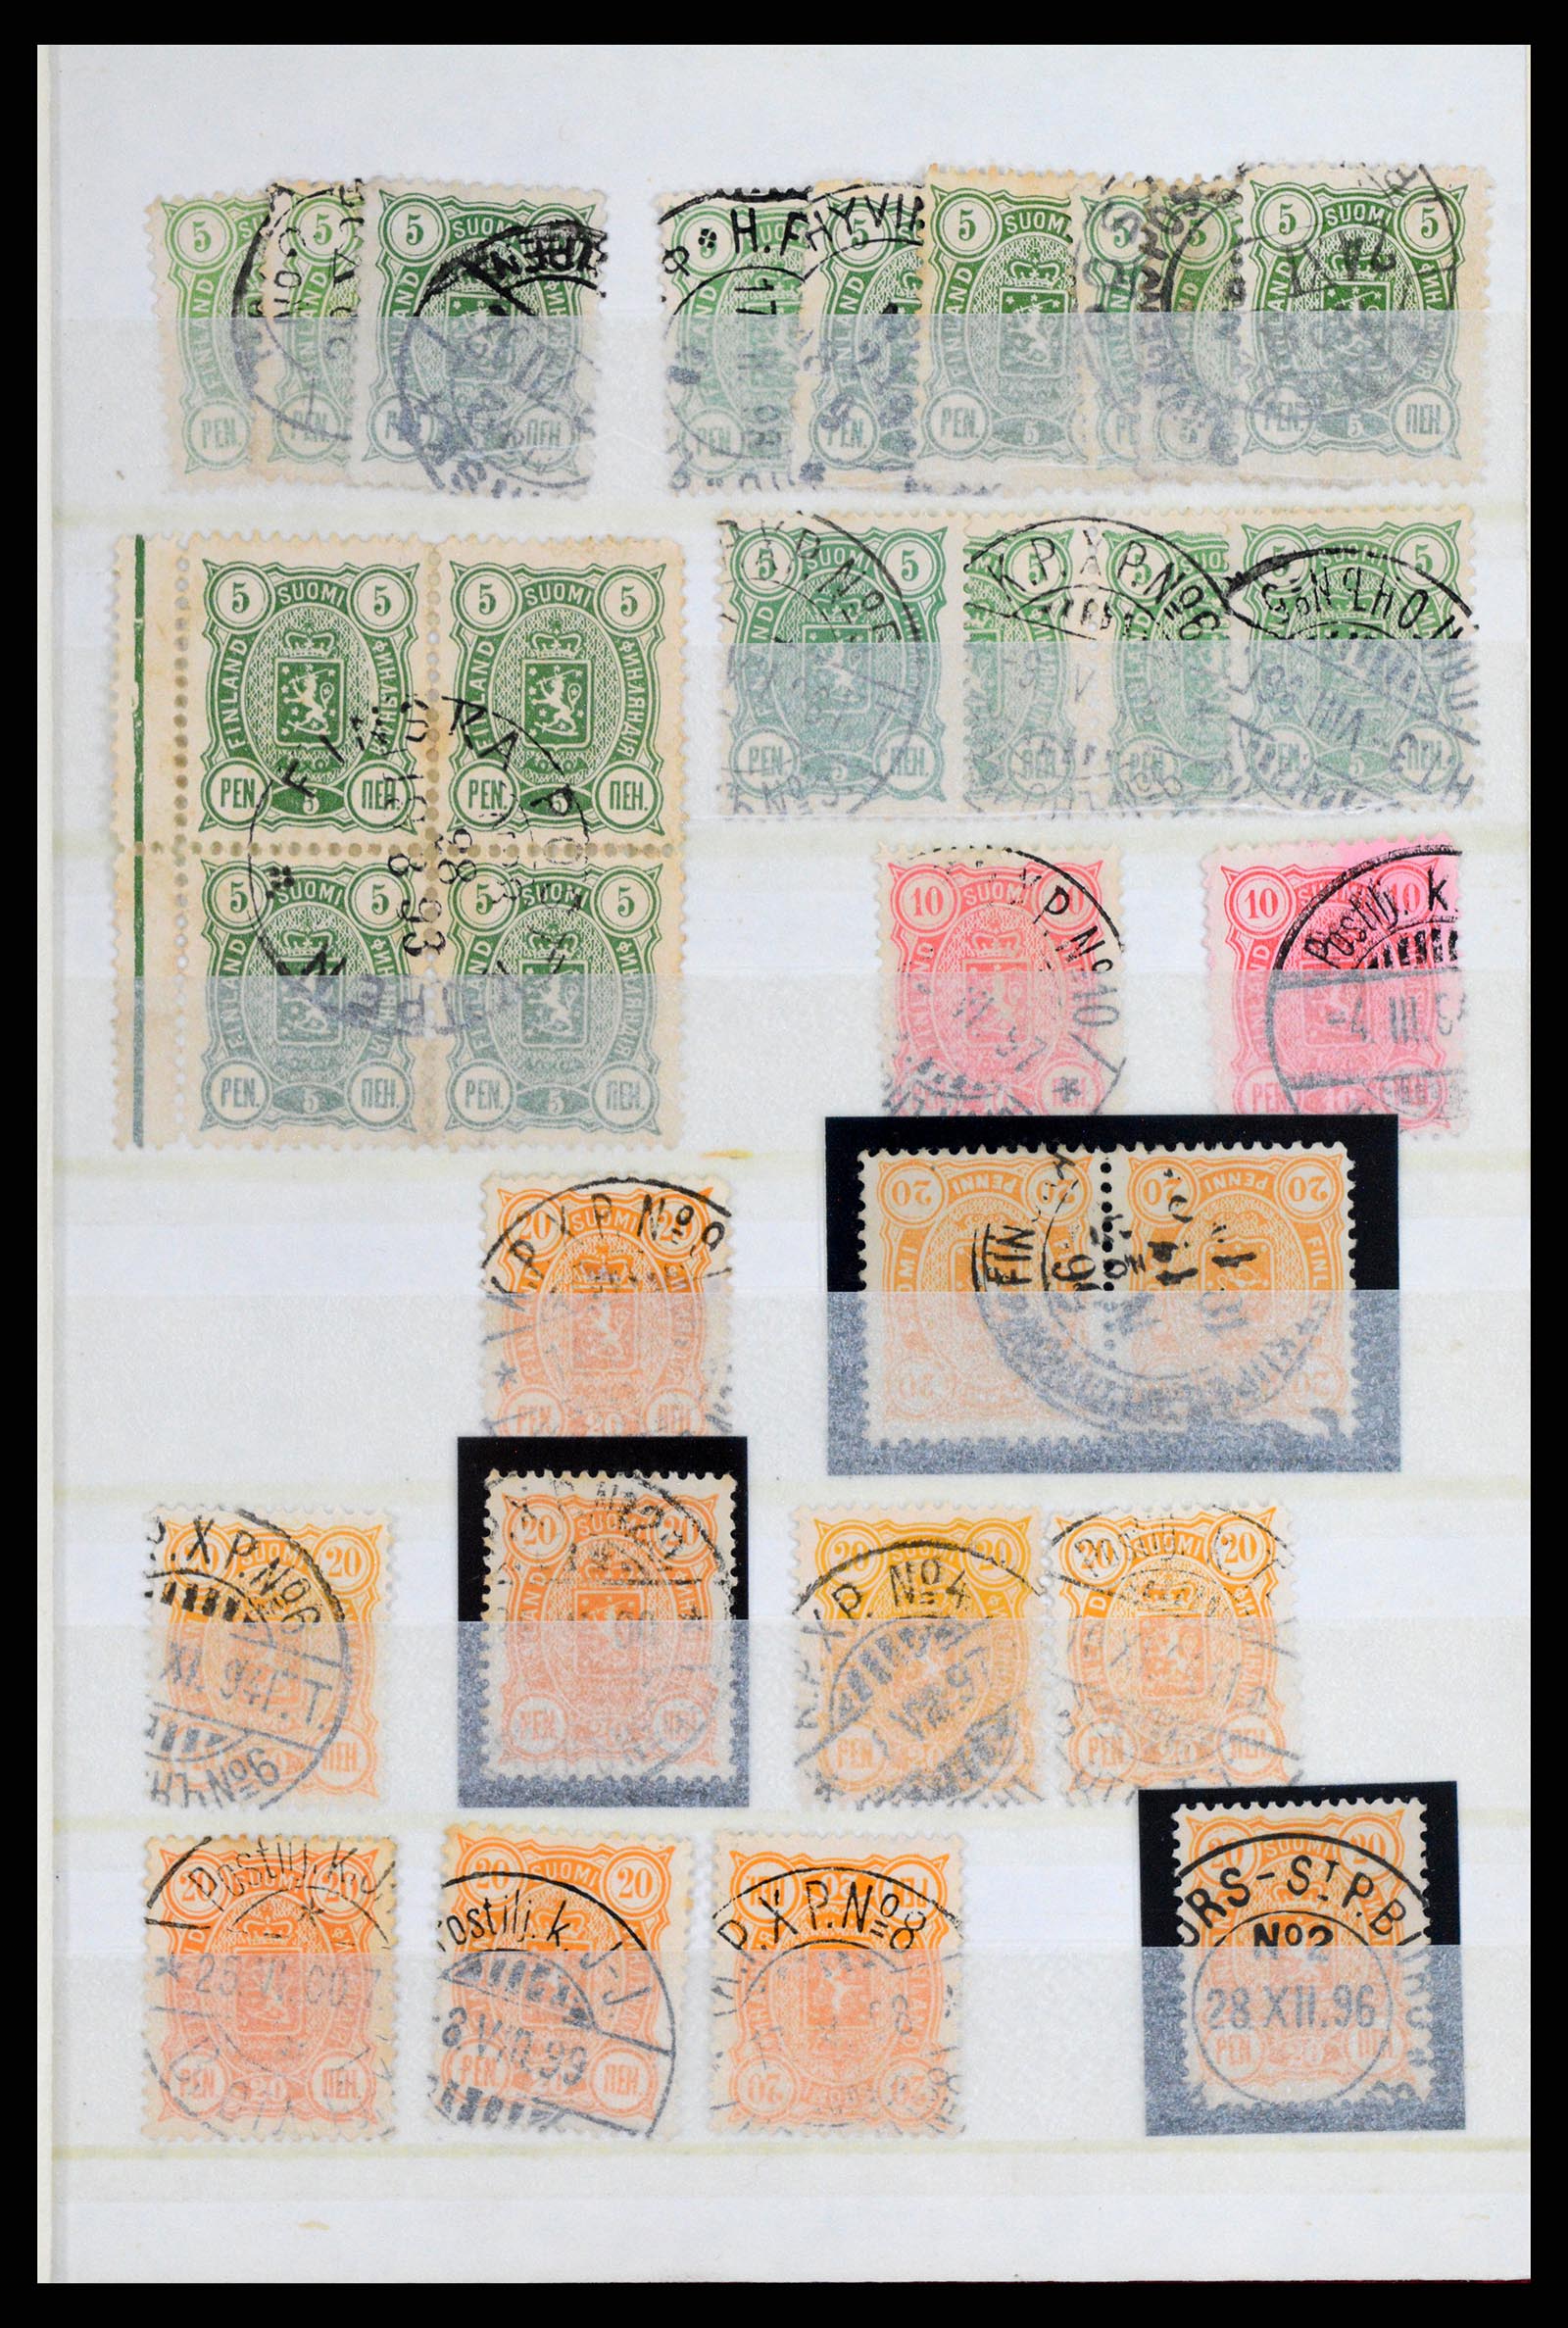 37766 168 - Stamp collection 37766 Finland railway cancellations 1870-1950.